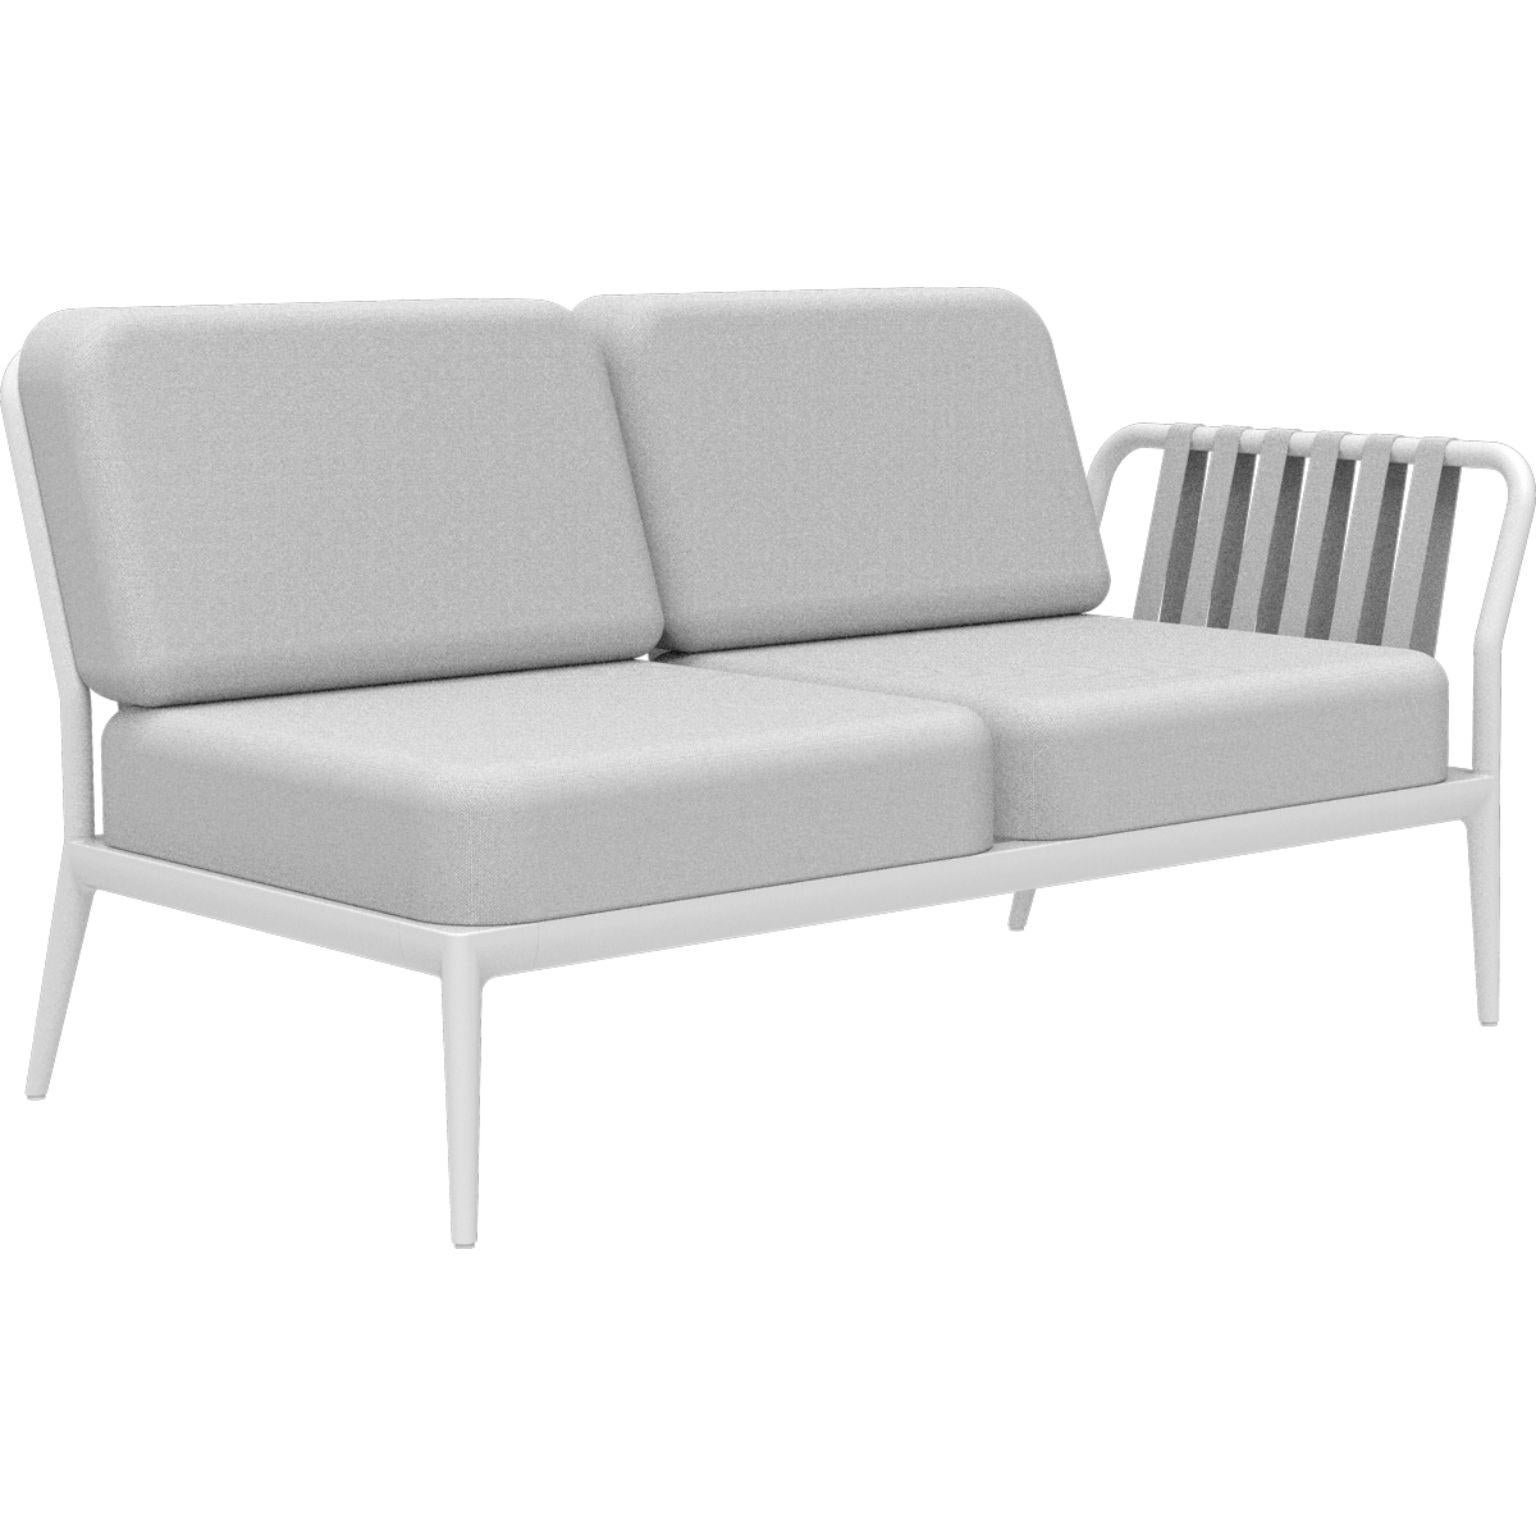 Ribbons White double left modular sofa by MOWEE
Dimensions: D83 x W148 x H81 cm (seat height 42 cm).
Material: Aluminum and upholstery.
Weight: 29 kg
Also available in different colors and finishes.

An unmistakable collection for its beauty